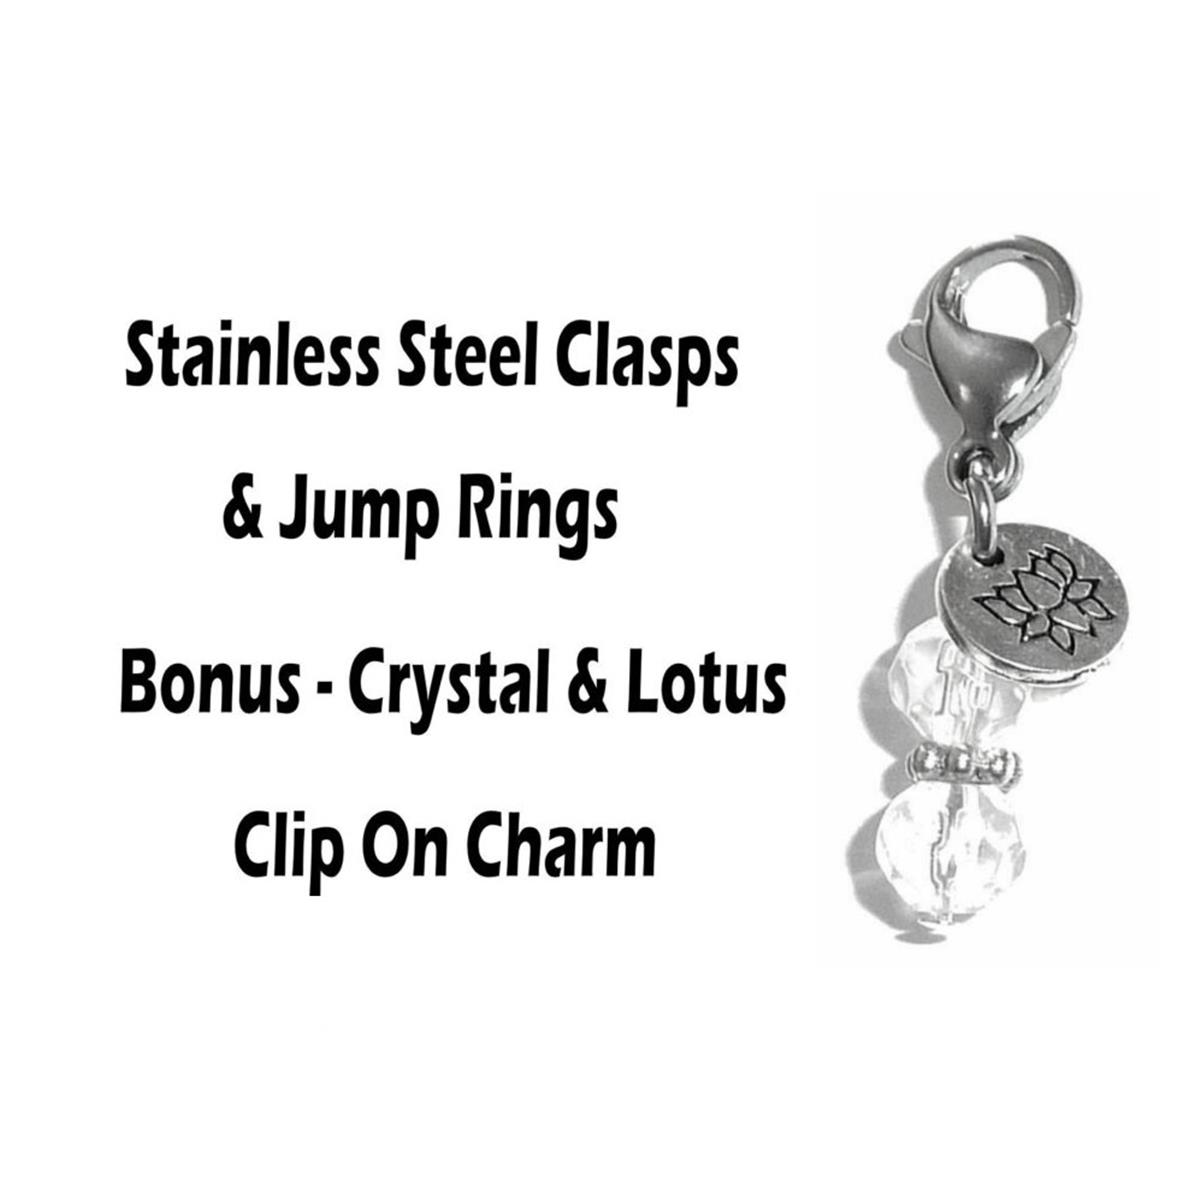 Flower Blossom Clip On Charms - Whimsical Charms Clip On Anywhere